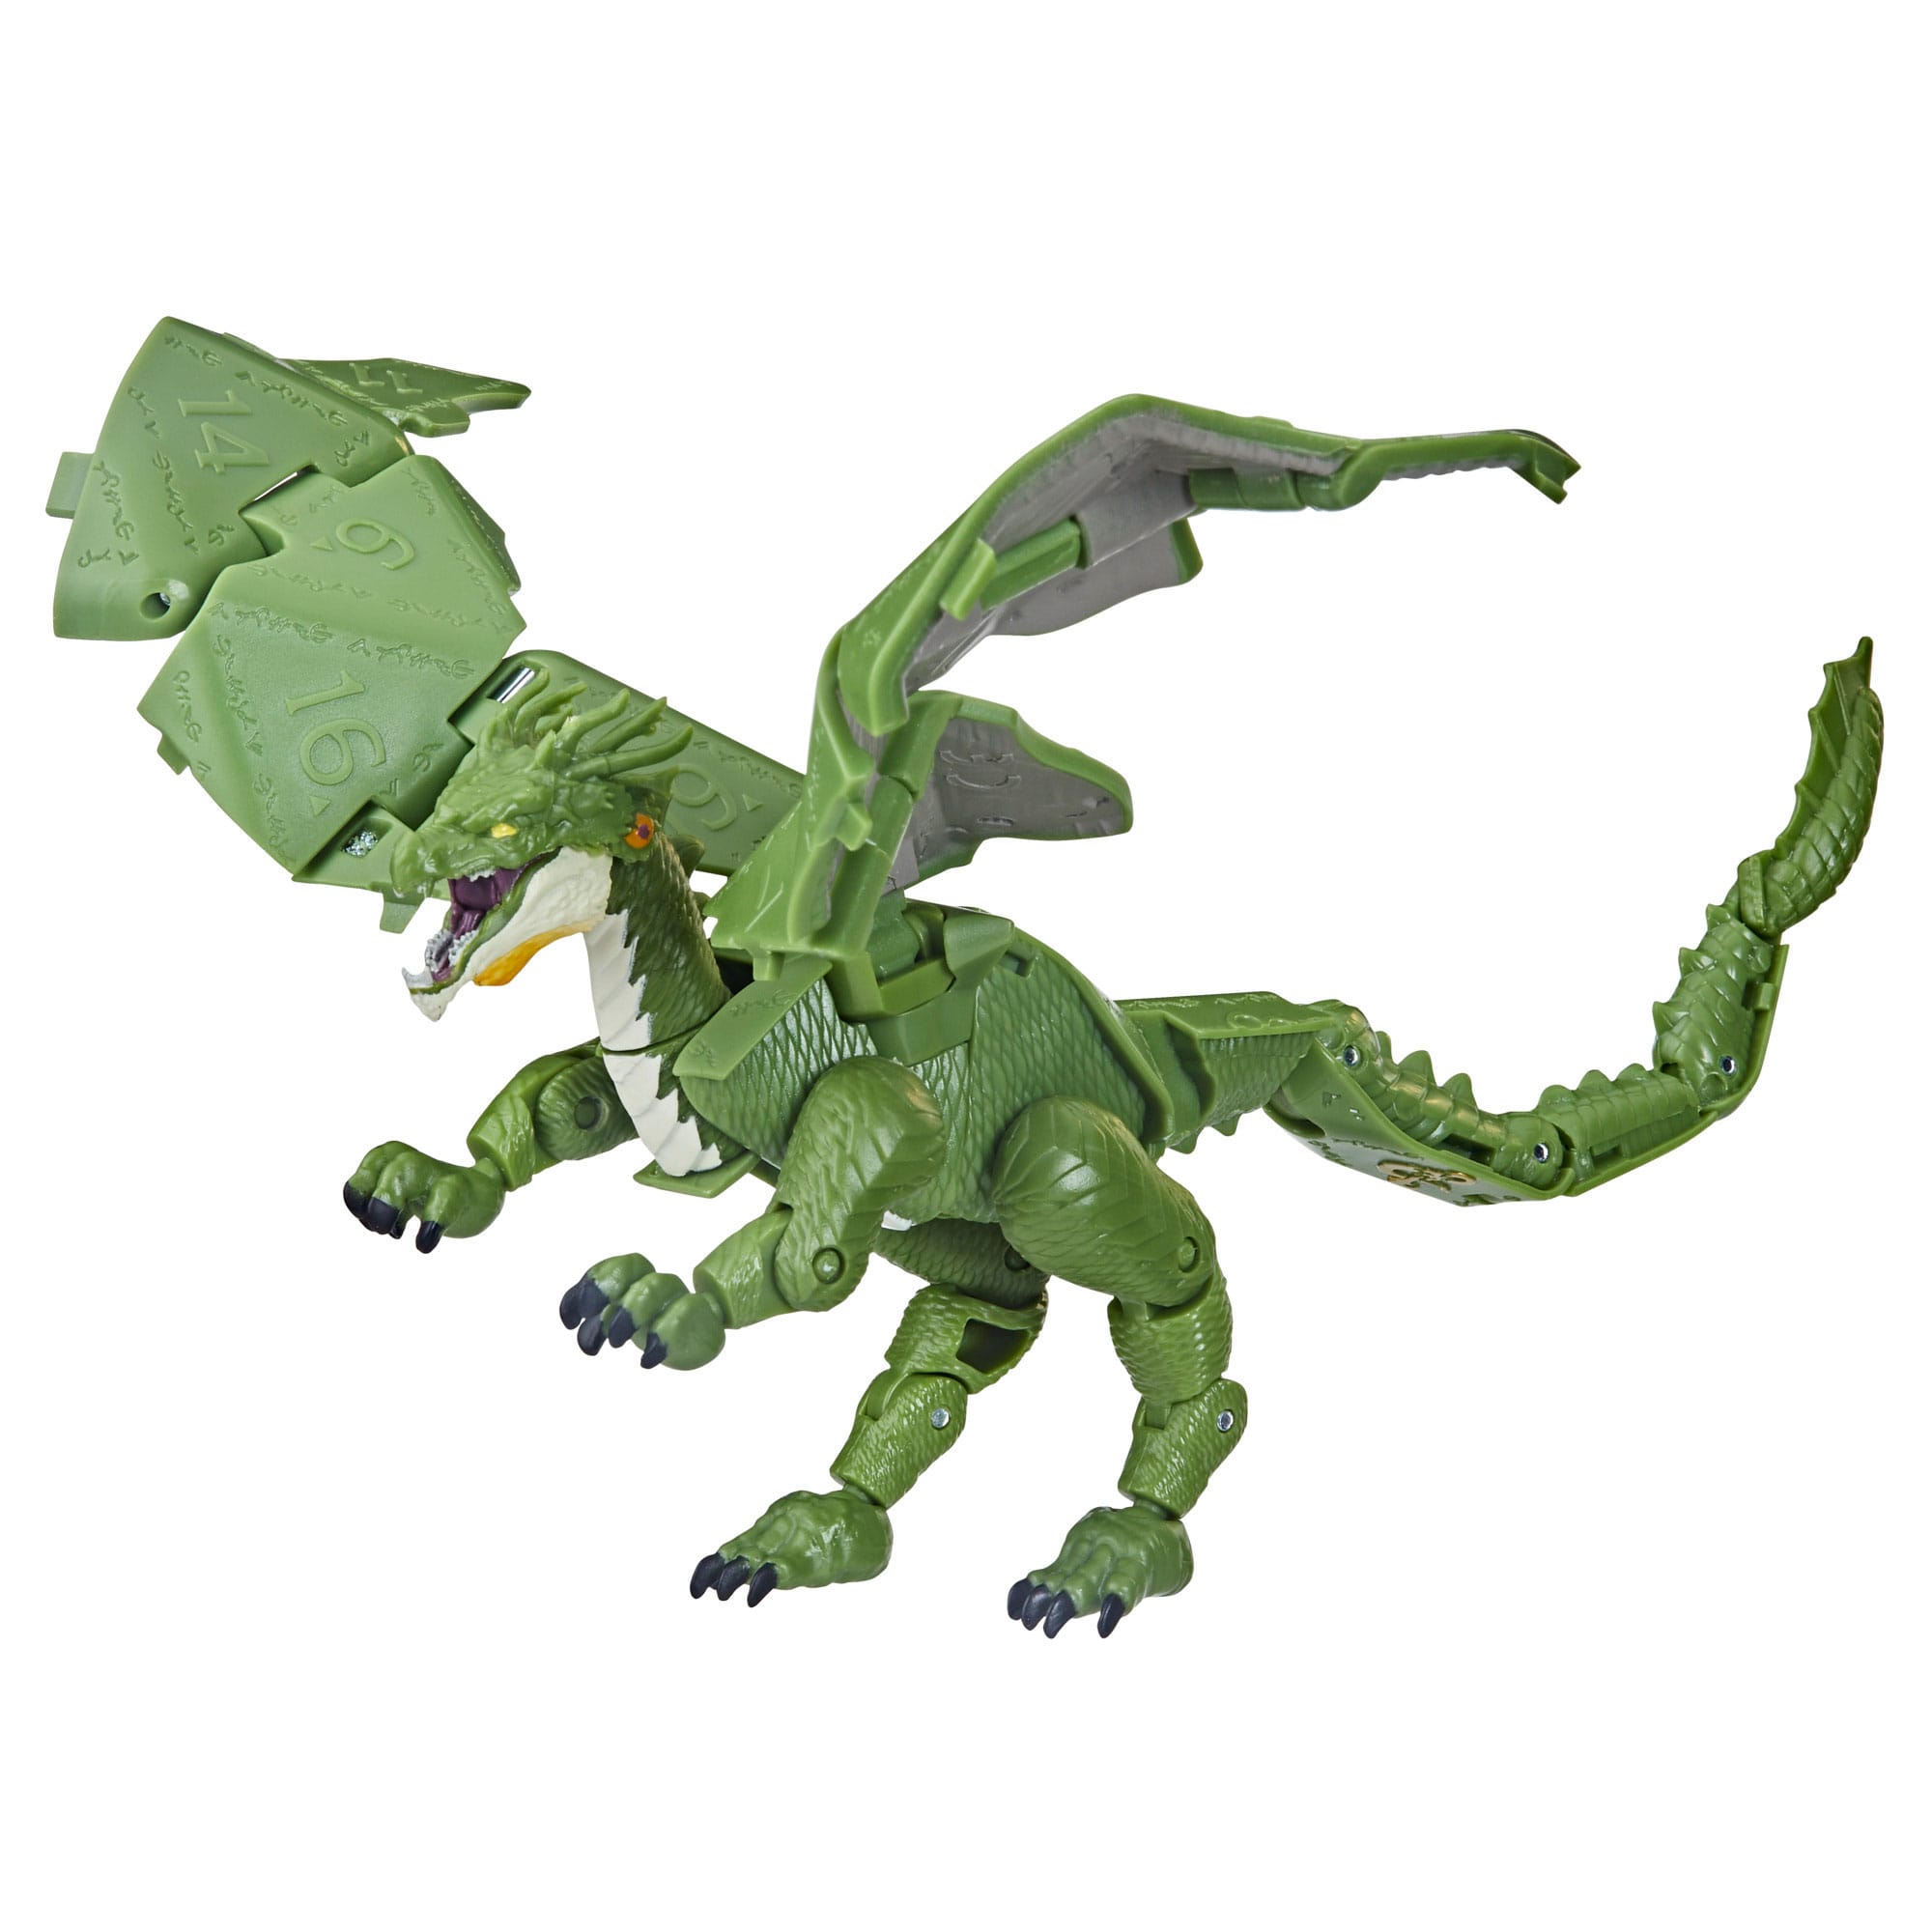 Dungeons & Dragons Dicelings Action Figure Green Dragon - Loaded Dice Barry Vale of Glamorgan CF64 3HD